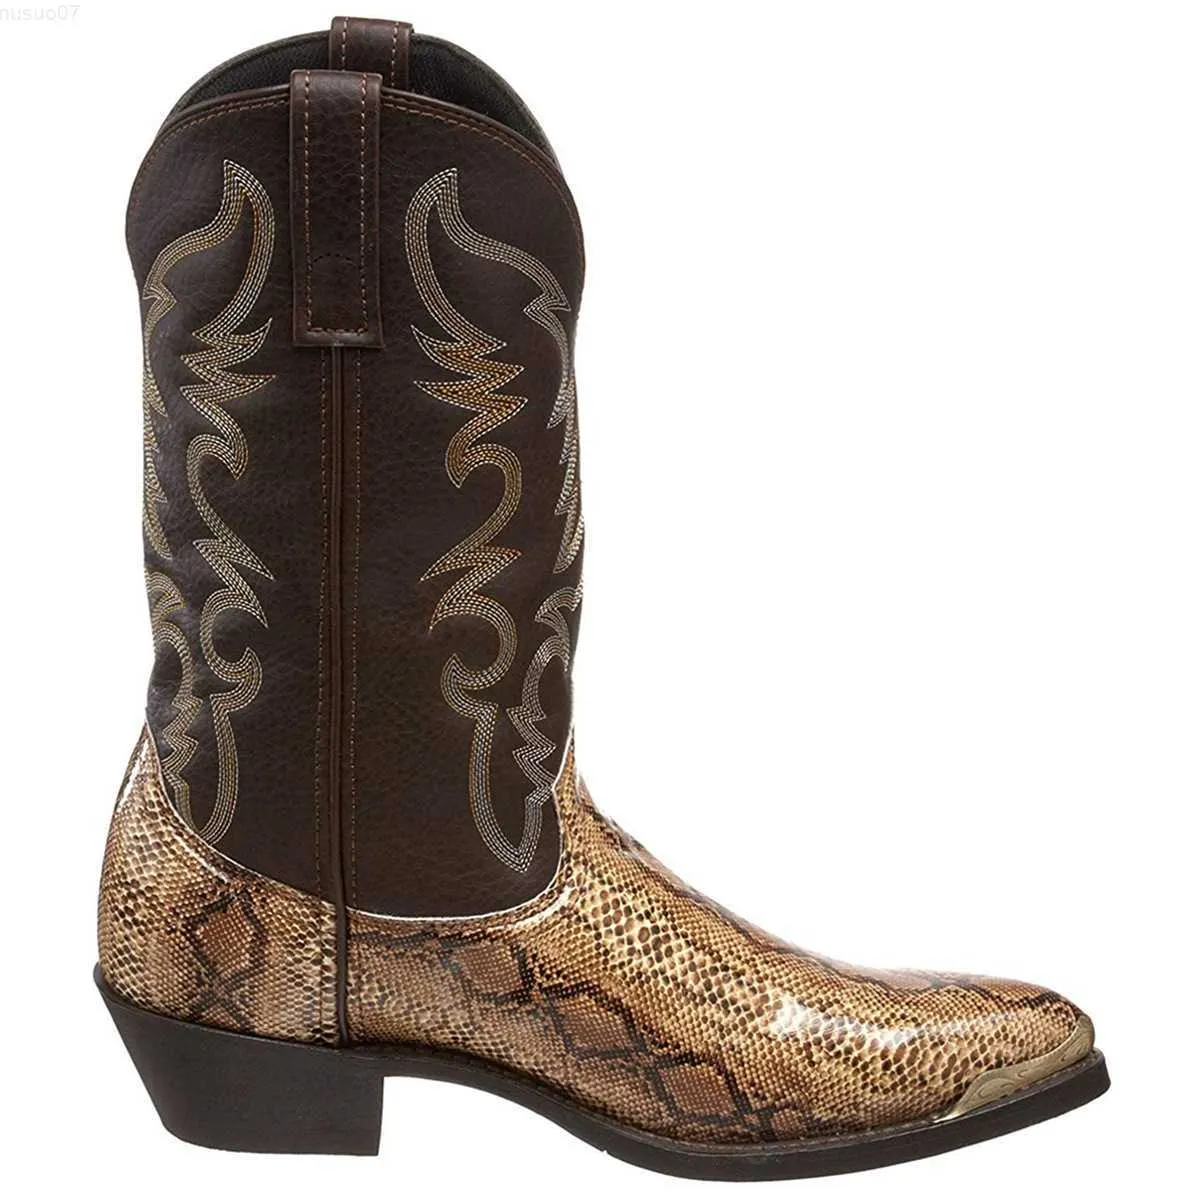 Boots Retro Men Women Boots Golden Head Snake Skin Faux Leather Winter Shoes Embroidered Western Cowboy Boots Unisex Footwear Big Size L230711